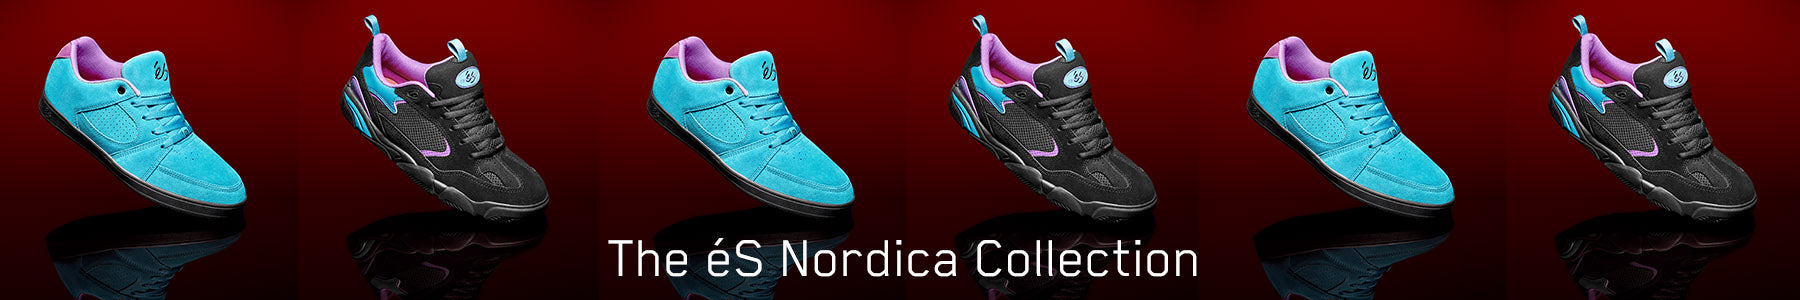 NORDICA COLLECTION